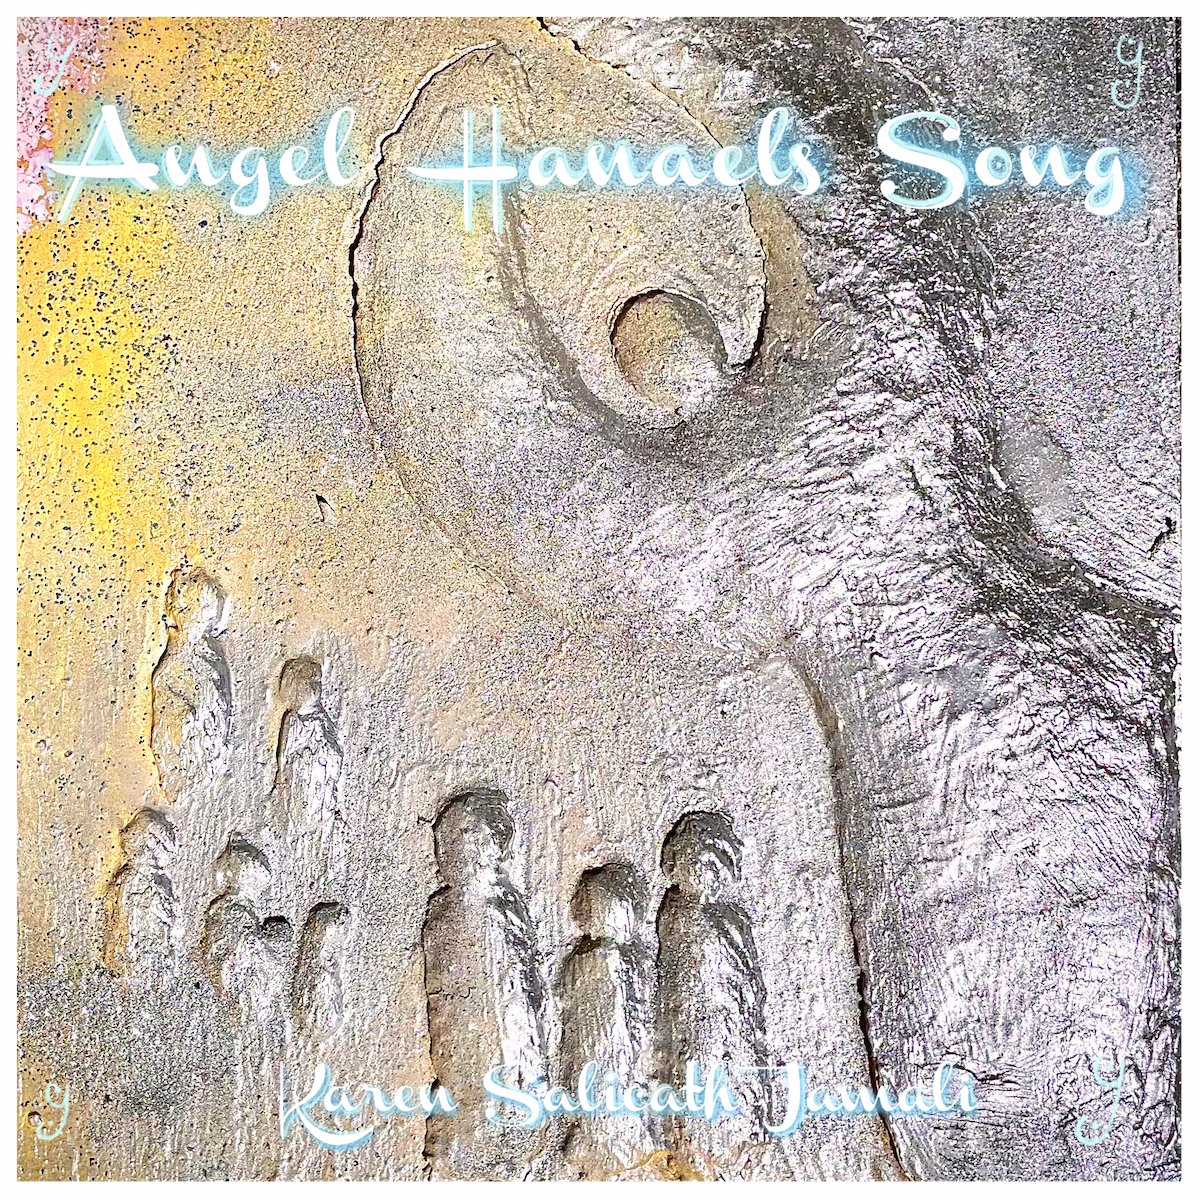 Listen to the album 'Angel Hanael´s Song' below on Spotify and enjoy incredible neo-classical music from the lovely Karen Salicath Jamali.
#indiedockmusicblog #classical

indiedockmusicblog.co.uk/?p=23895